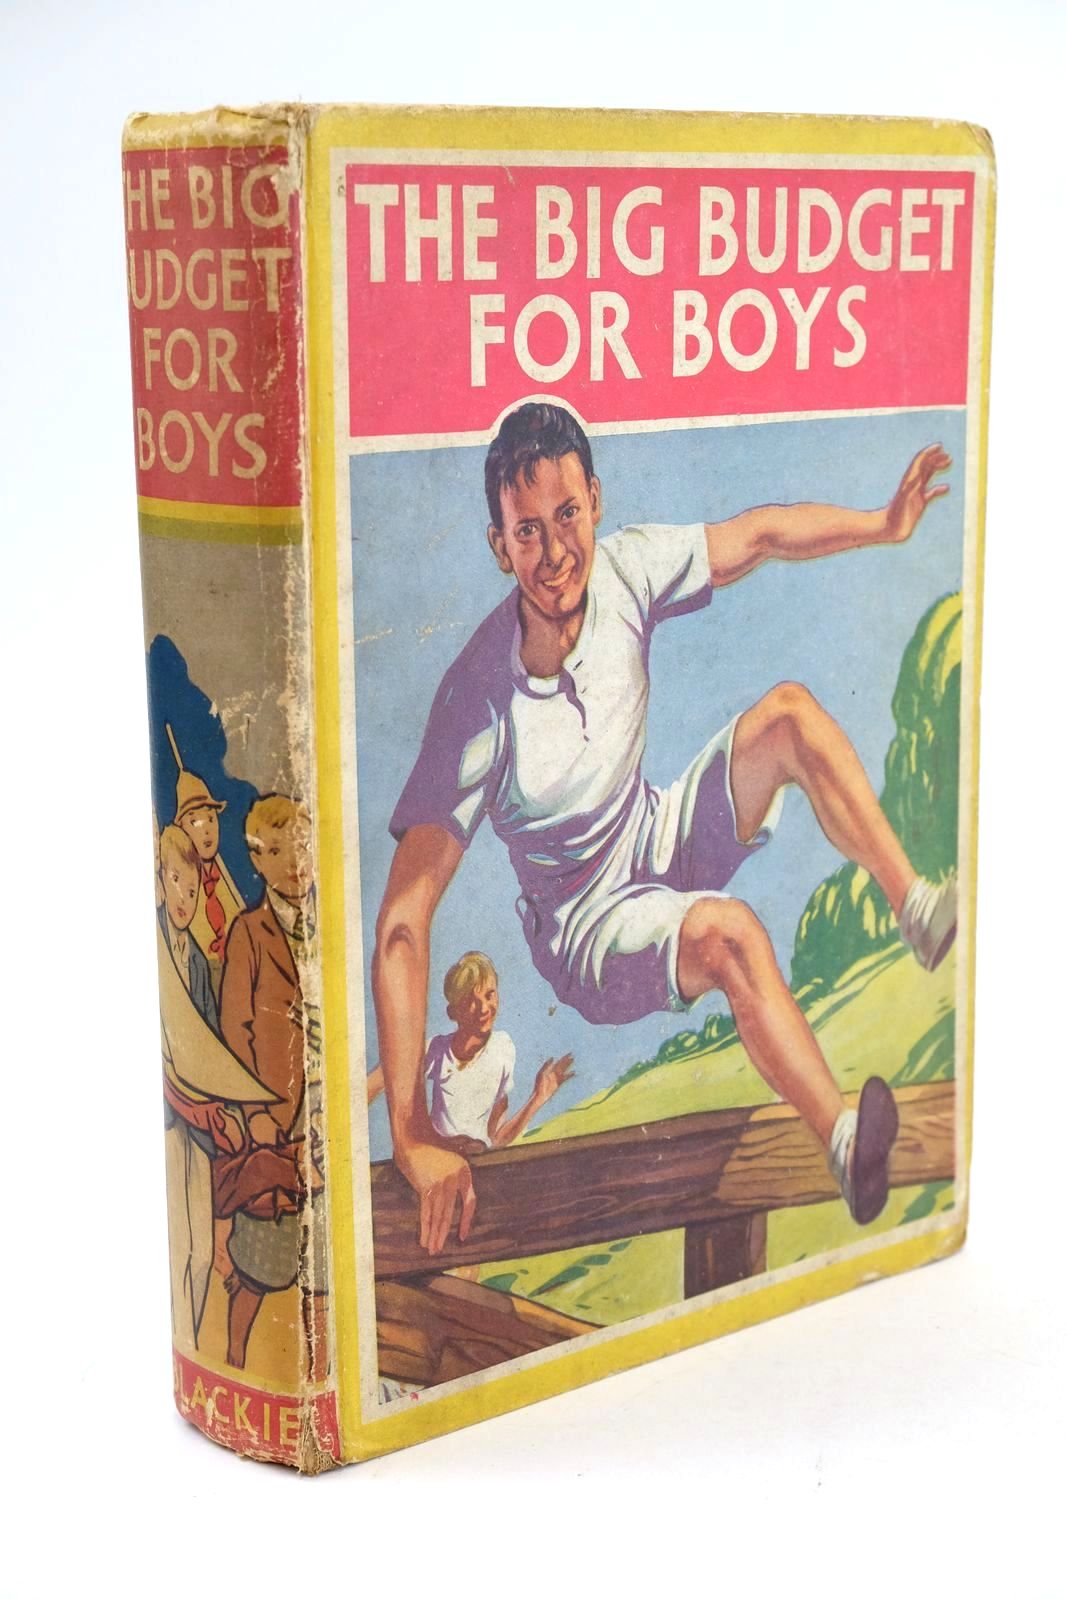 Photo of THE BIG BUDGET FOR BOYS written by Holmes, W.K. Cowper, E.E. Lucas, S. Beresford Rusty, et al, illustrated by Wigfull, W. Edward et al., published by Blackie &amp; Son Ltd. (STOCK CODE: 1325133)  for sale by Stella & Rose's Books